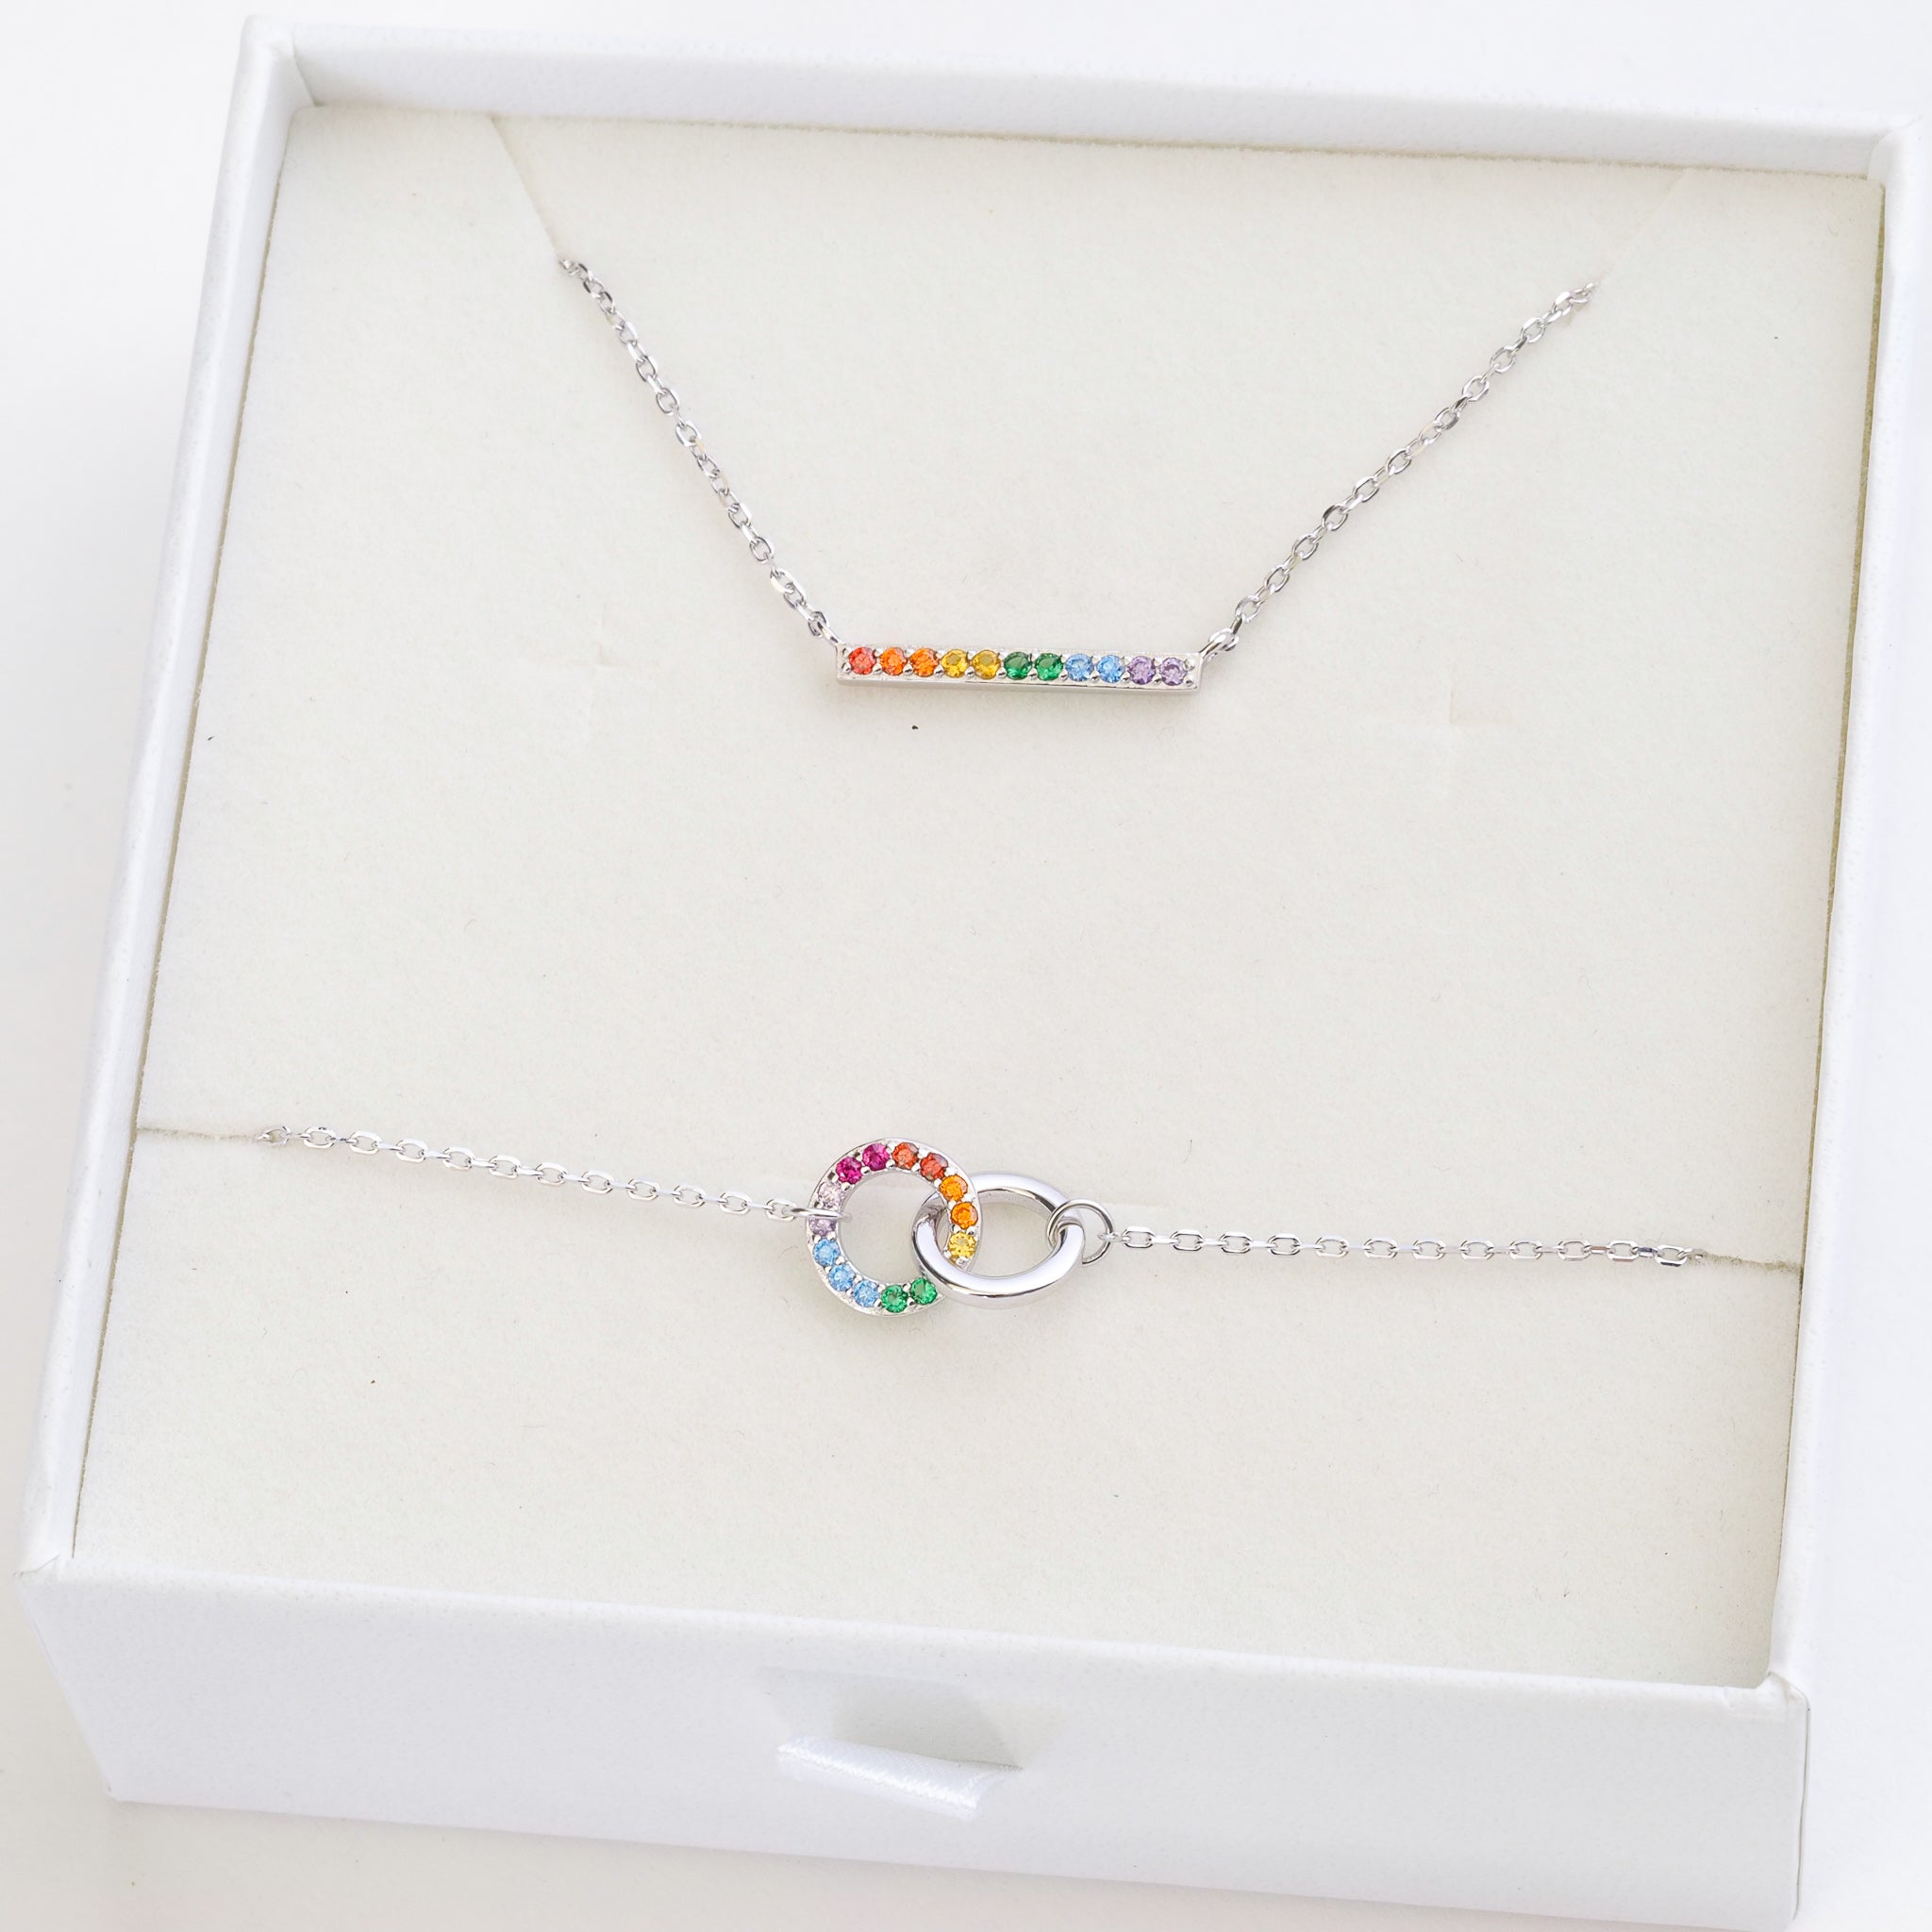 pride flag jewellery set featuring rainbow pride necklace and rainbow pride bracelet perfect as LGBTQI+ gift - silver